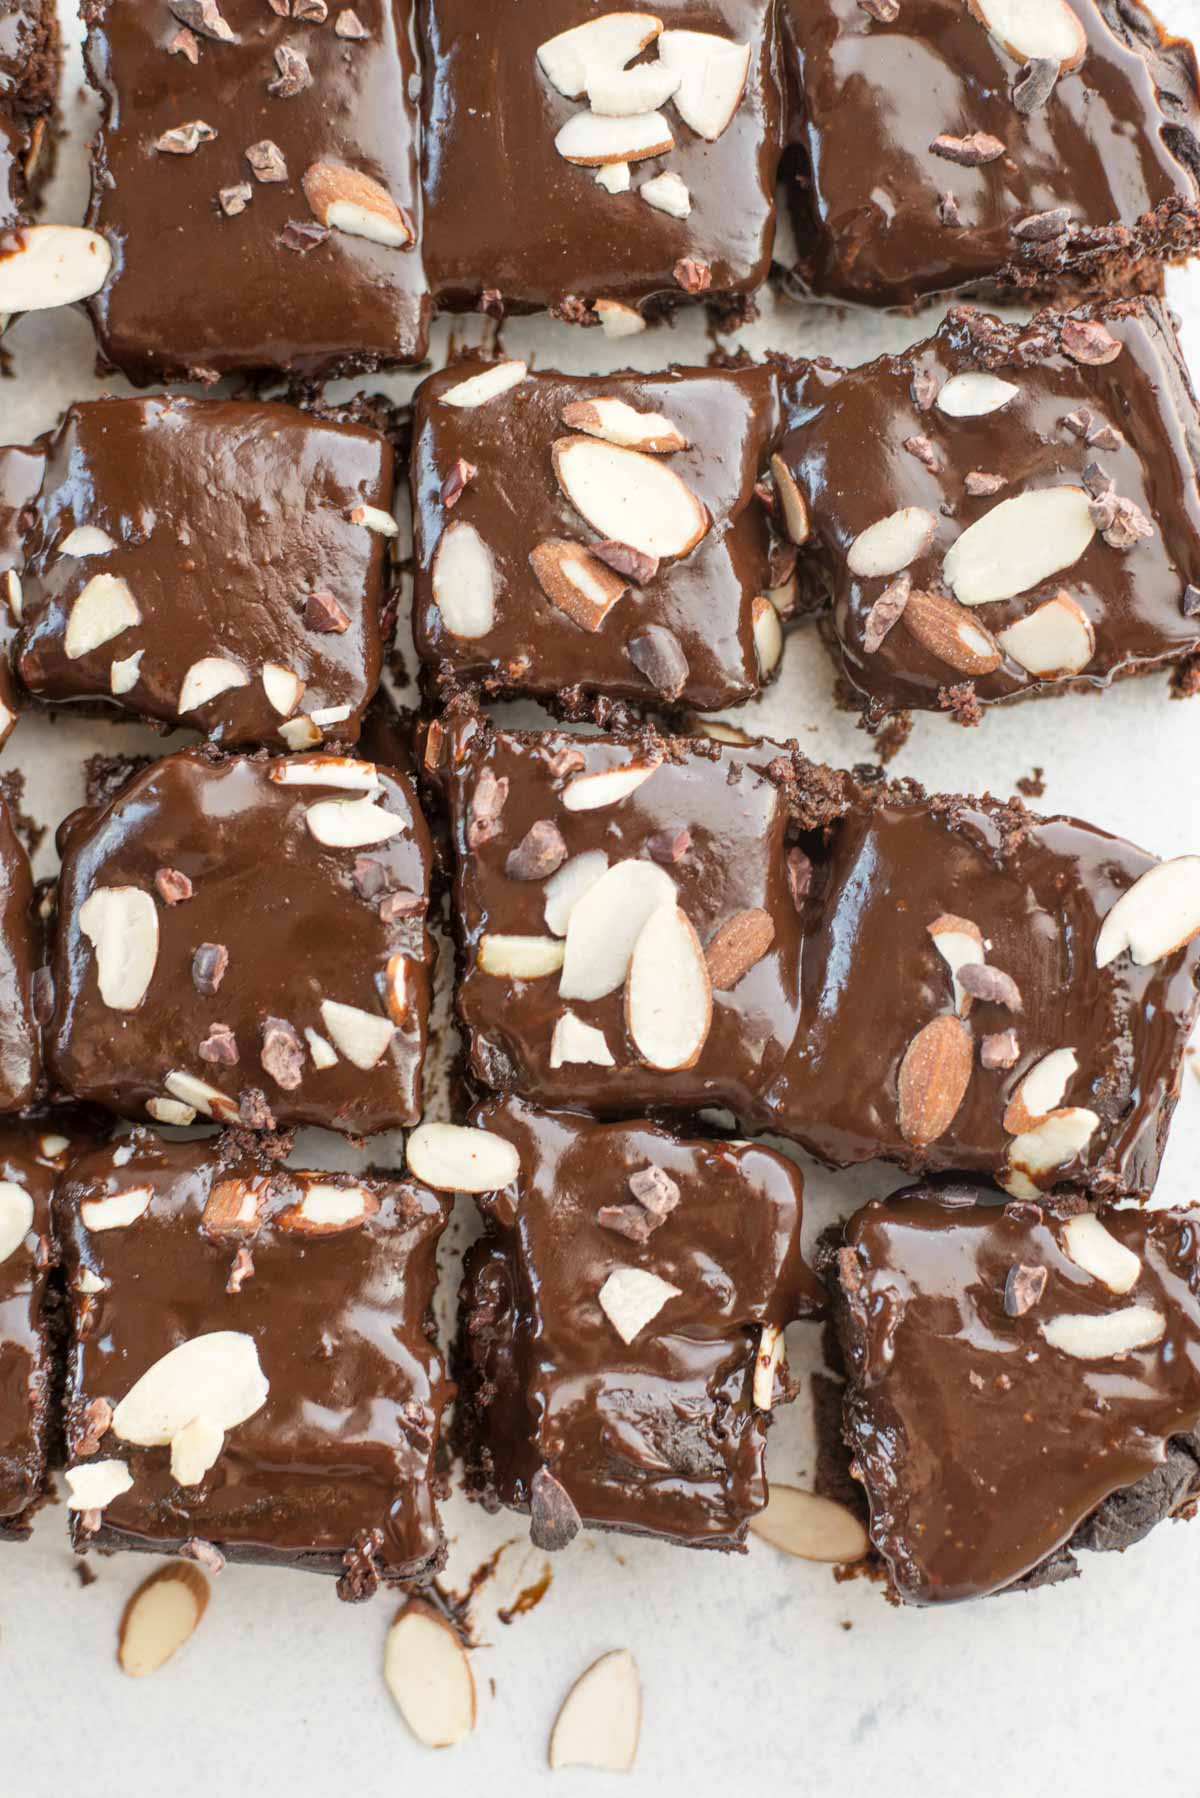 Blender Avocado Brownies with chocolate frosting are flour free and healthy!